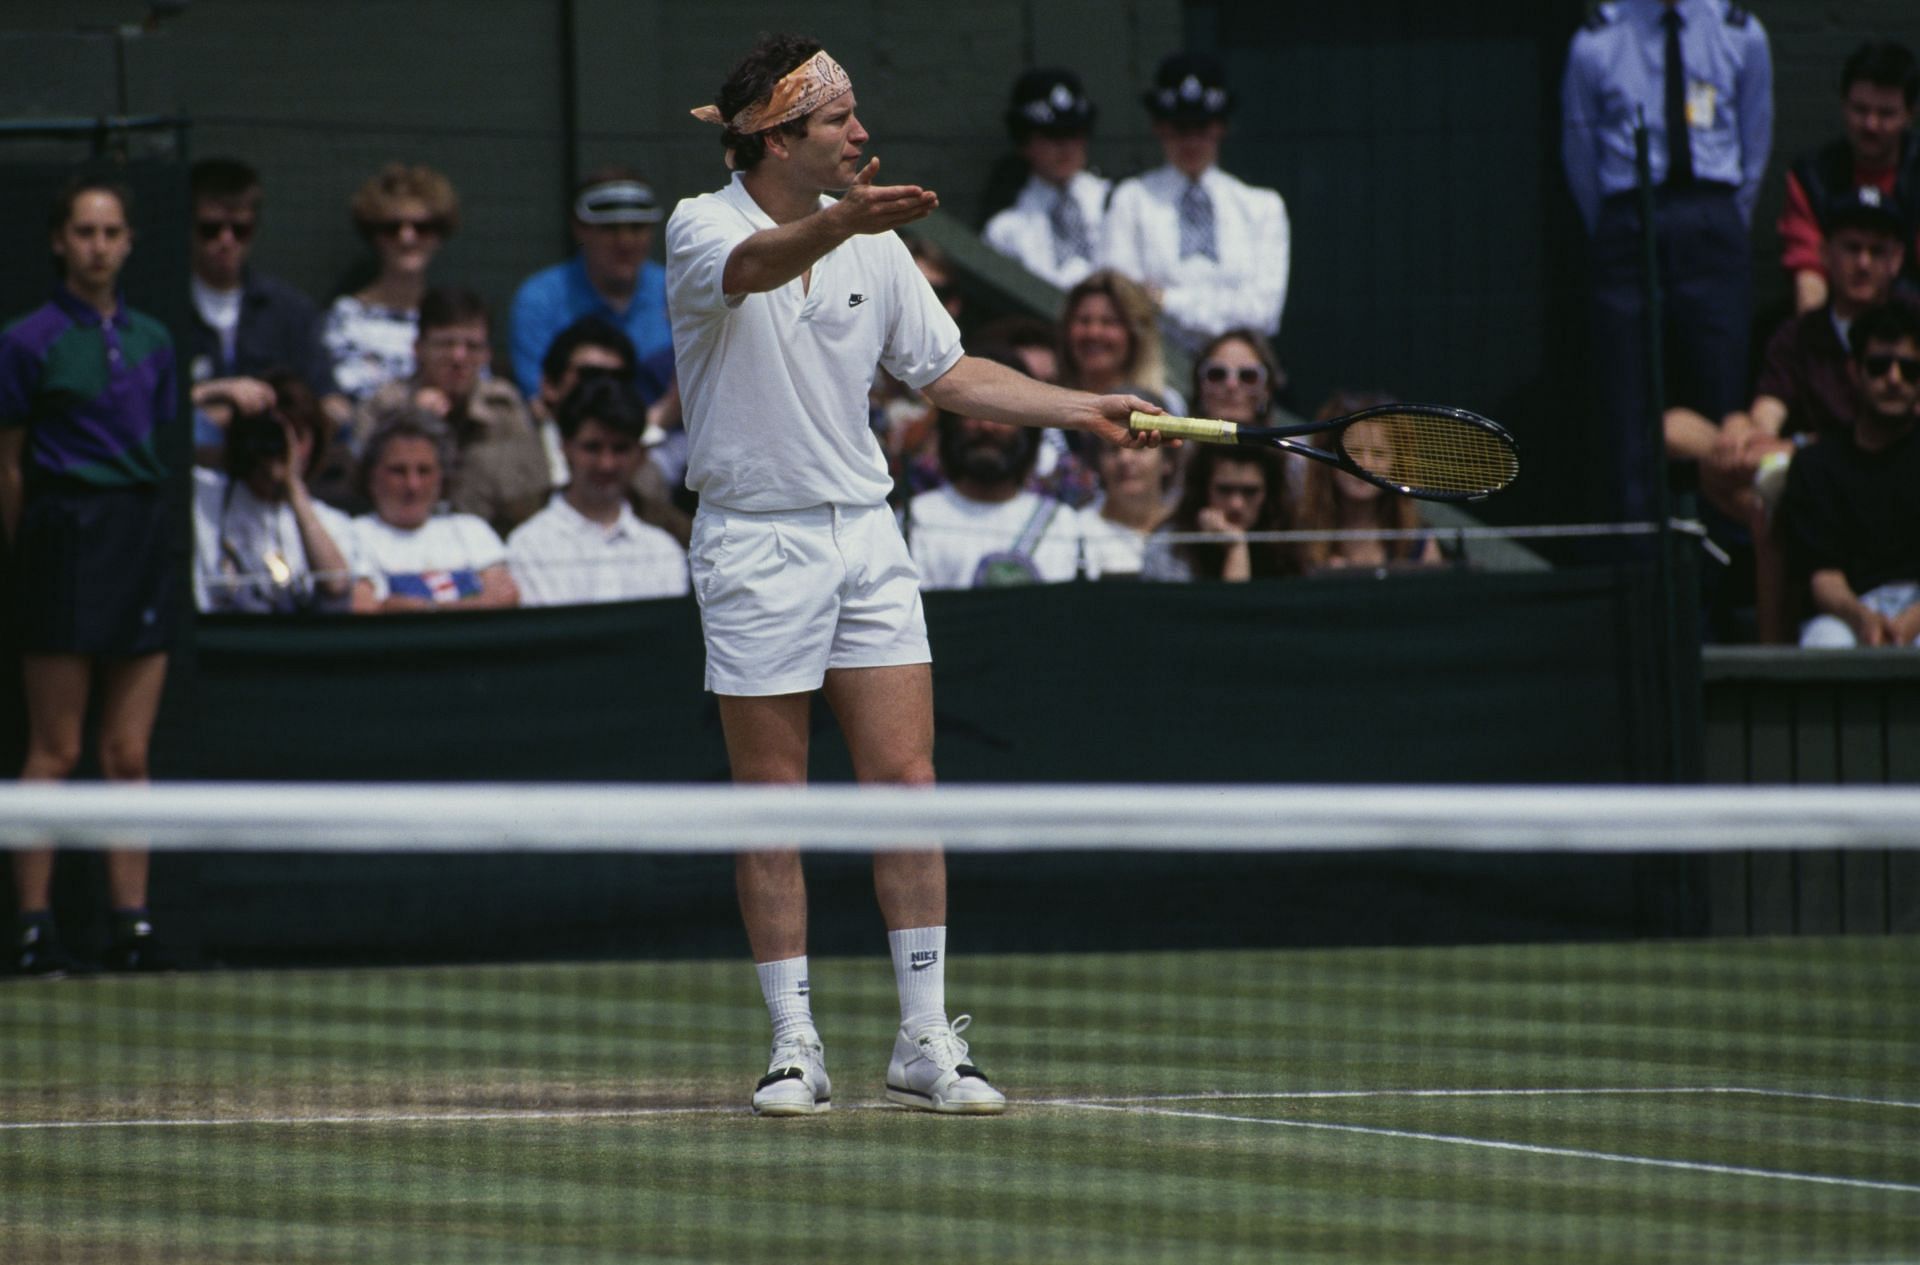 McEnroe lost to Agassi in WImbledon 1992